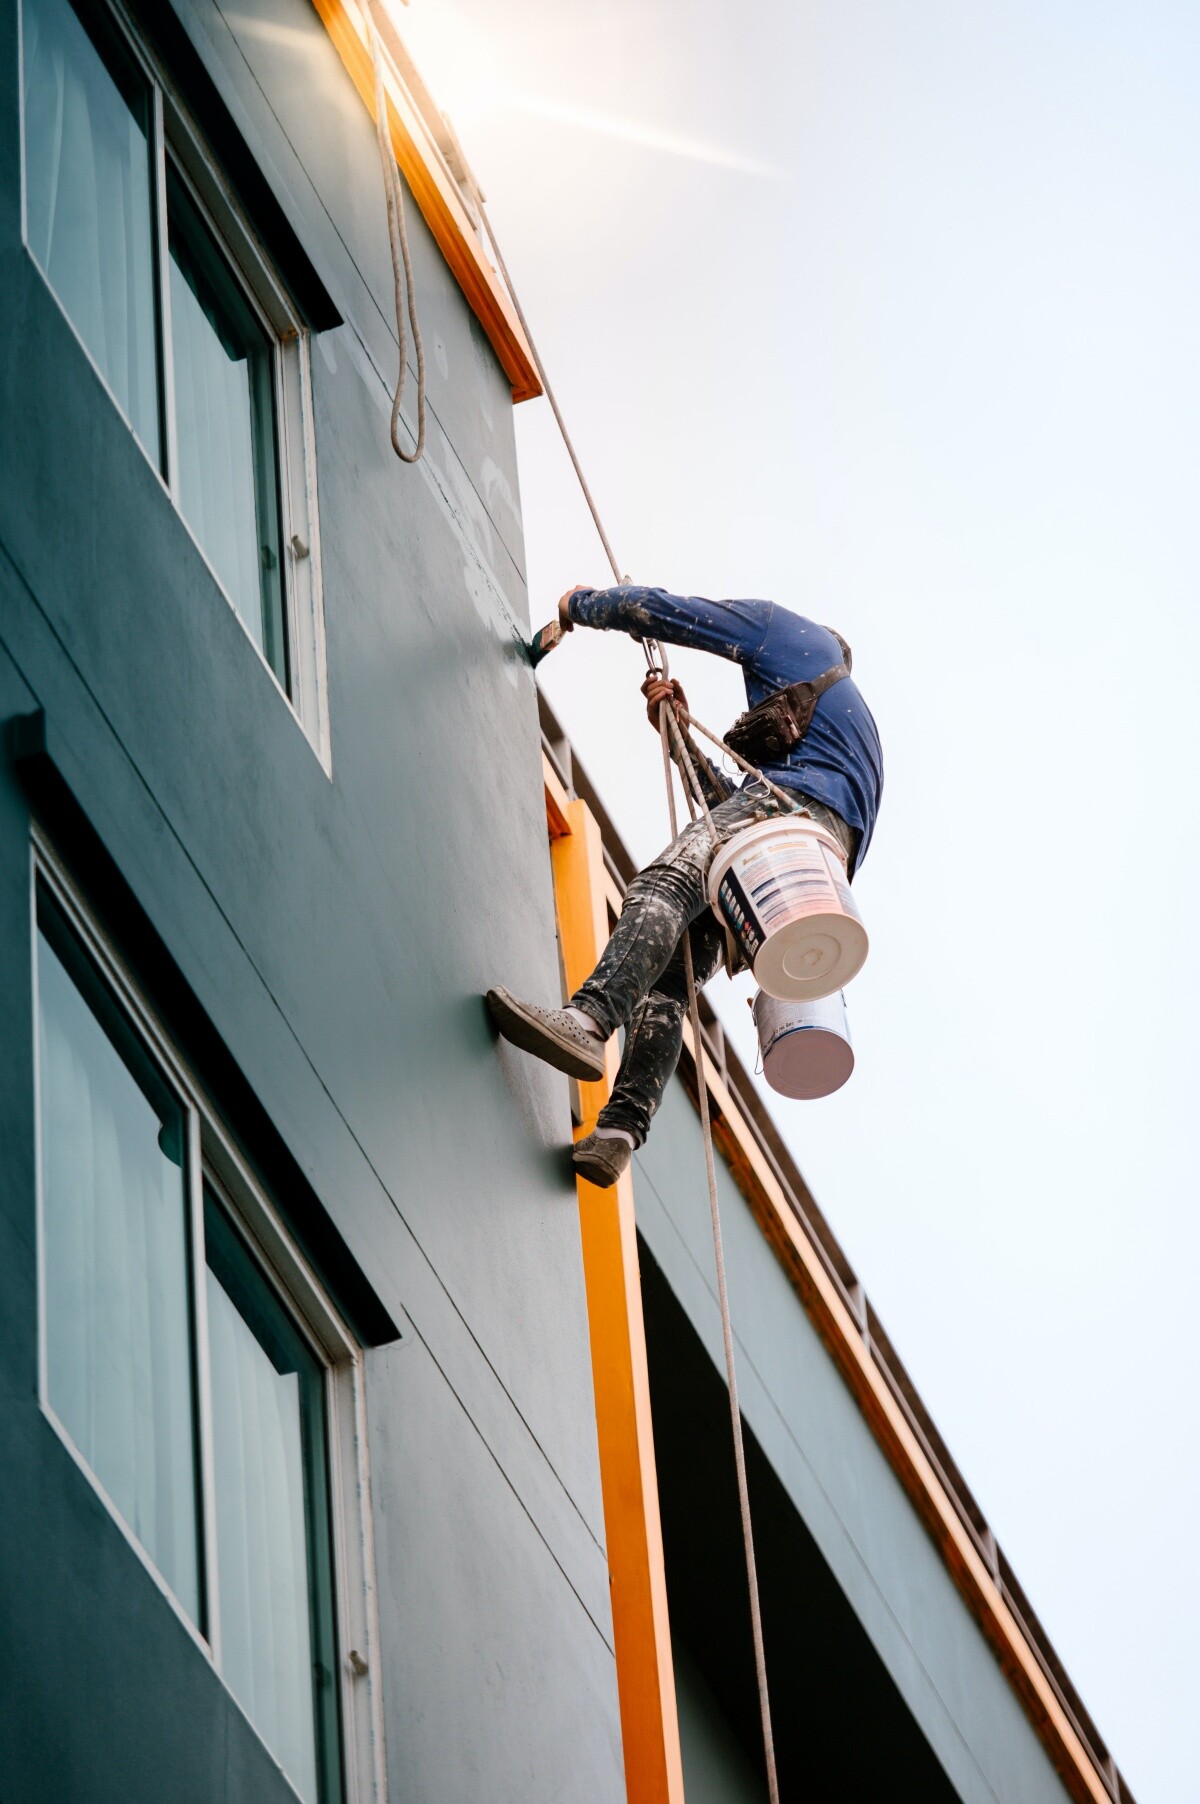 man hanging from rope painting commercial building